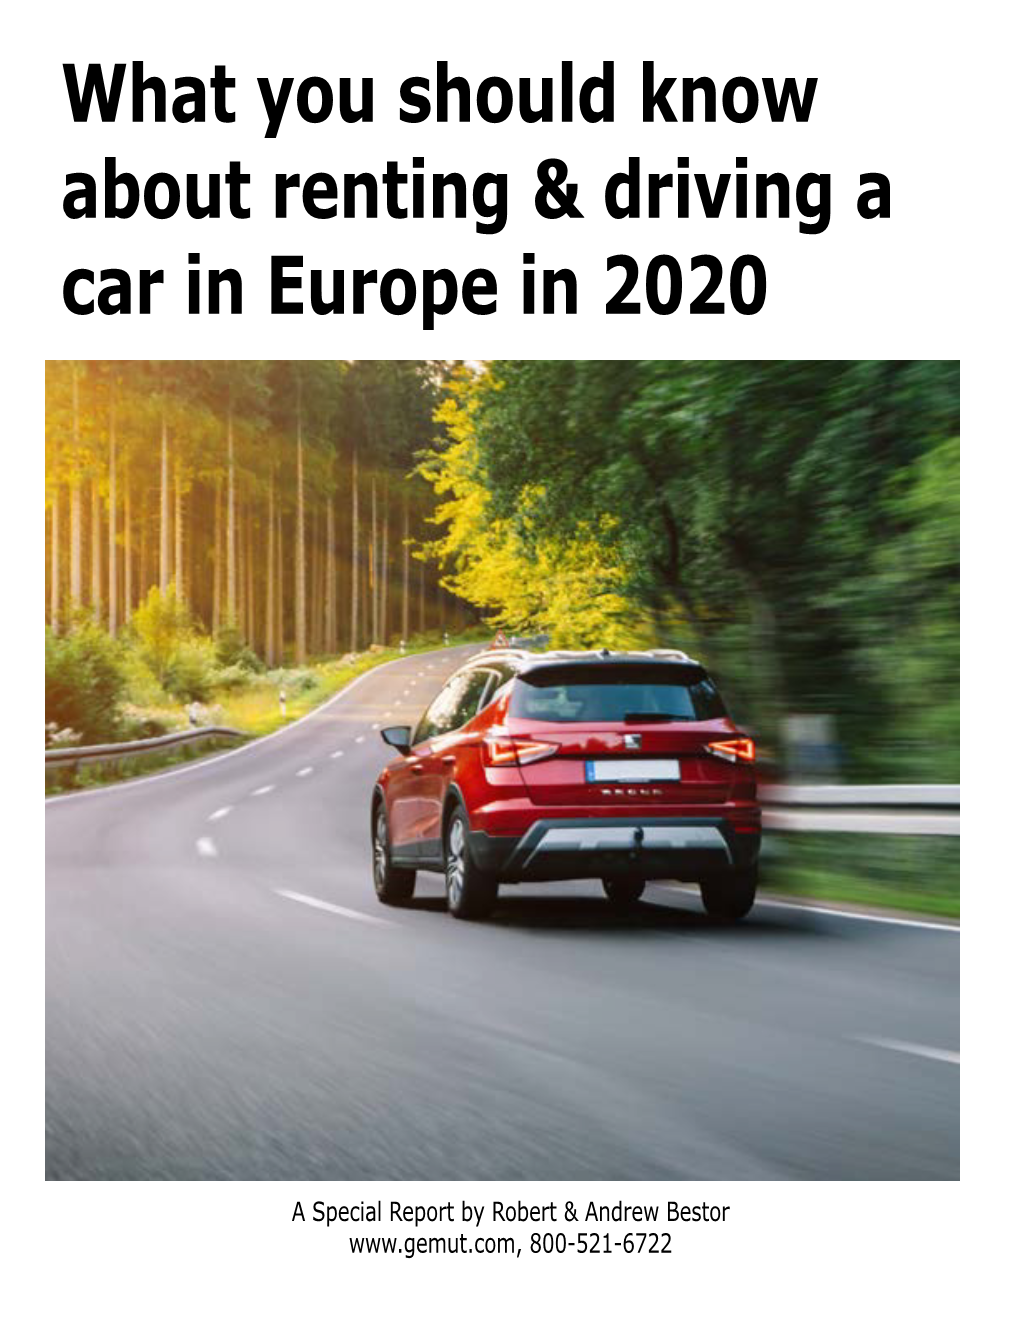 What You Should Know About Renting & Driving a Car in Europe in 2020